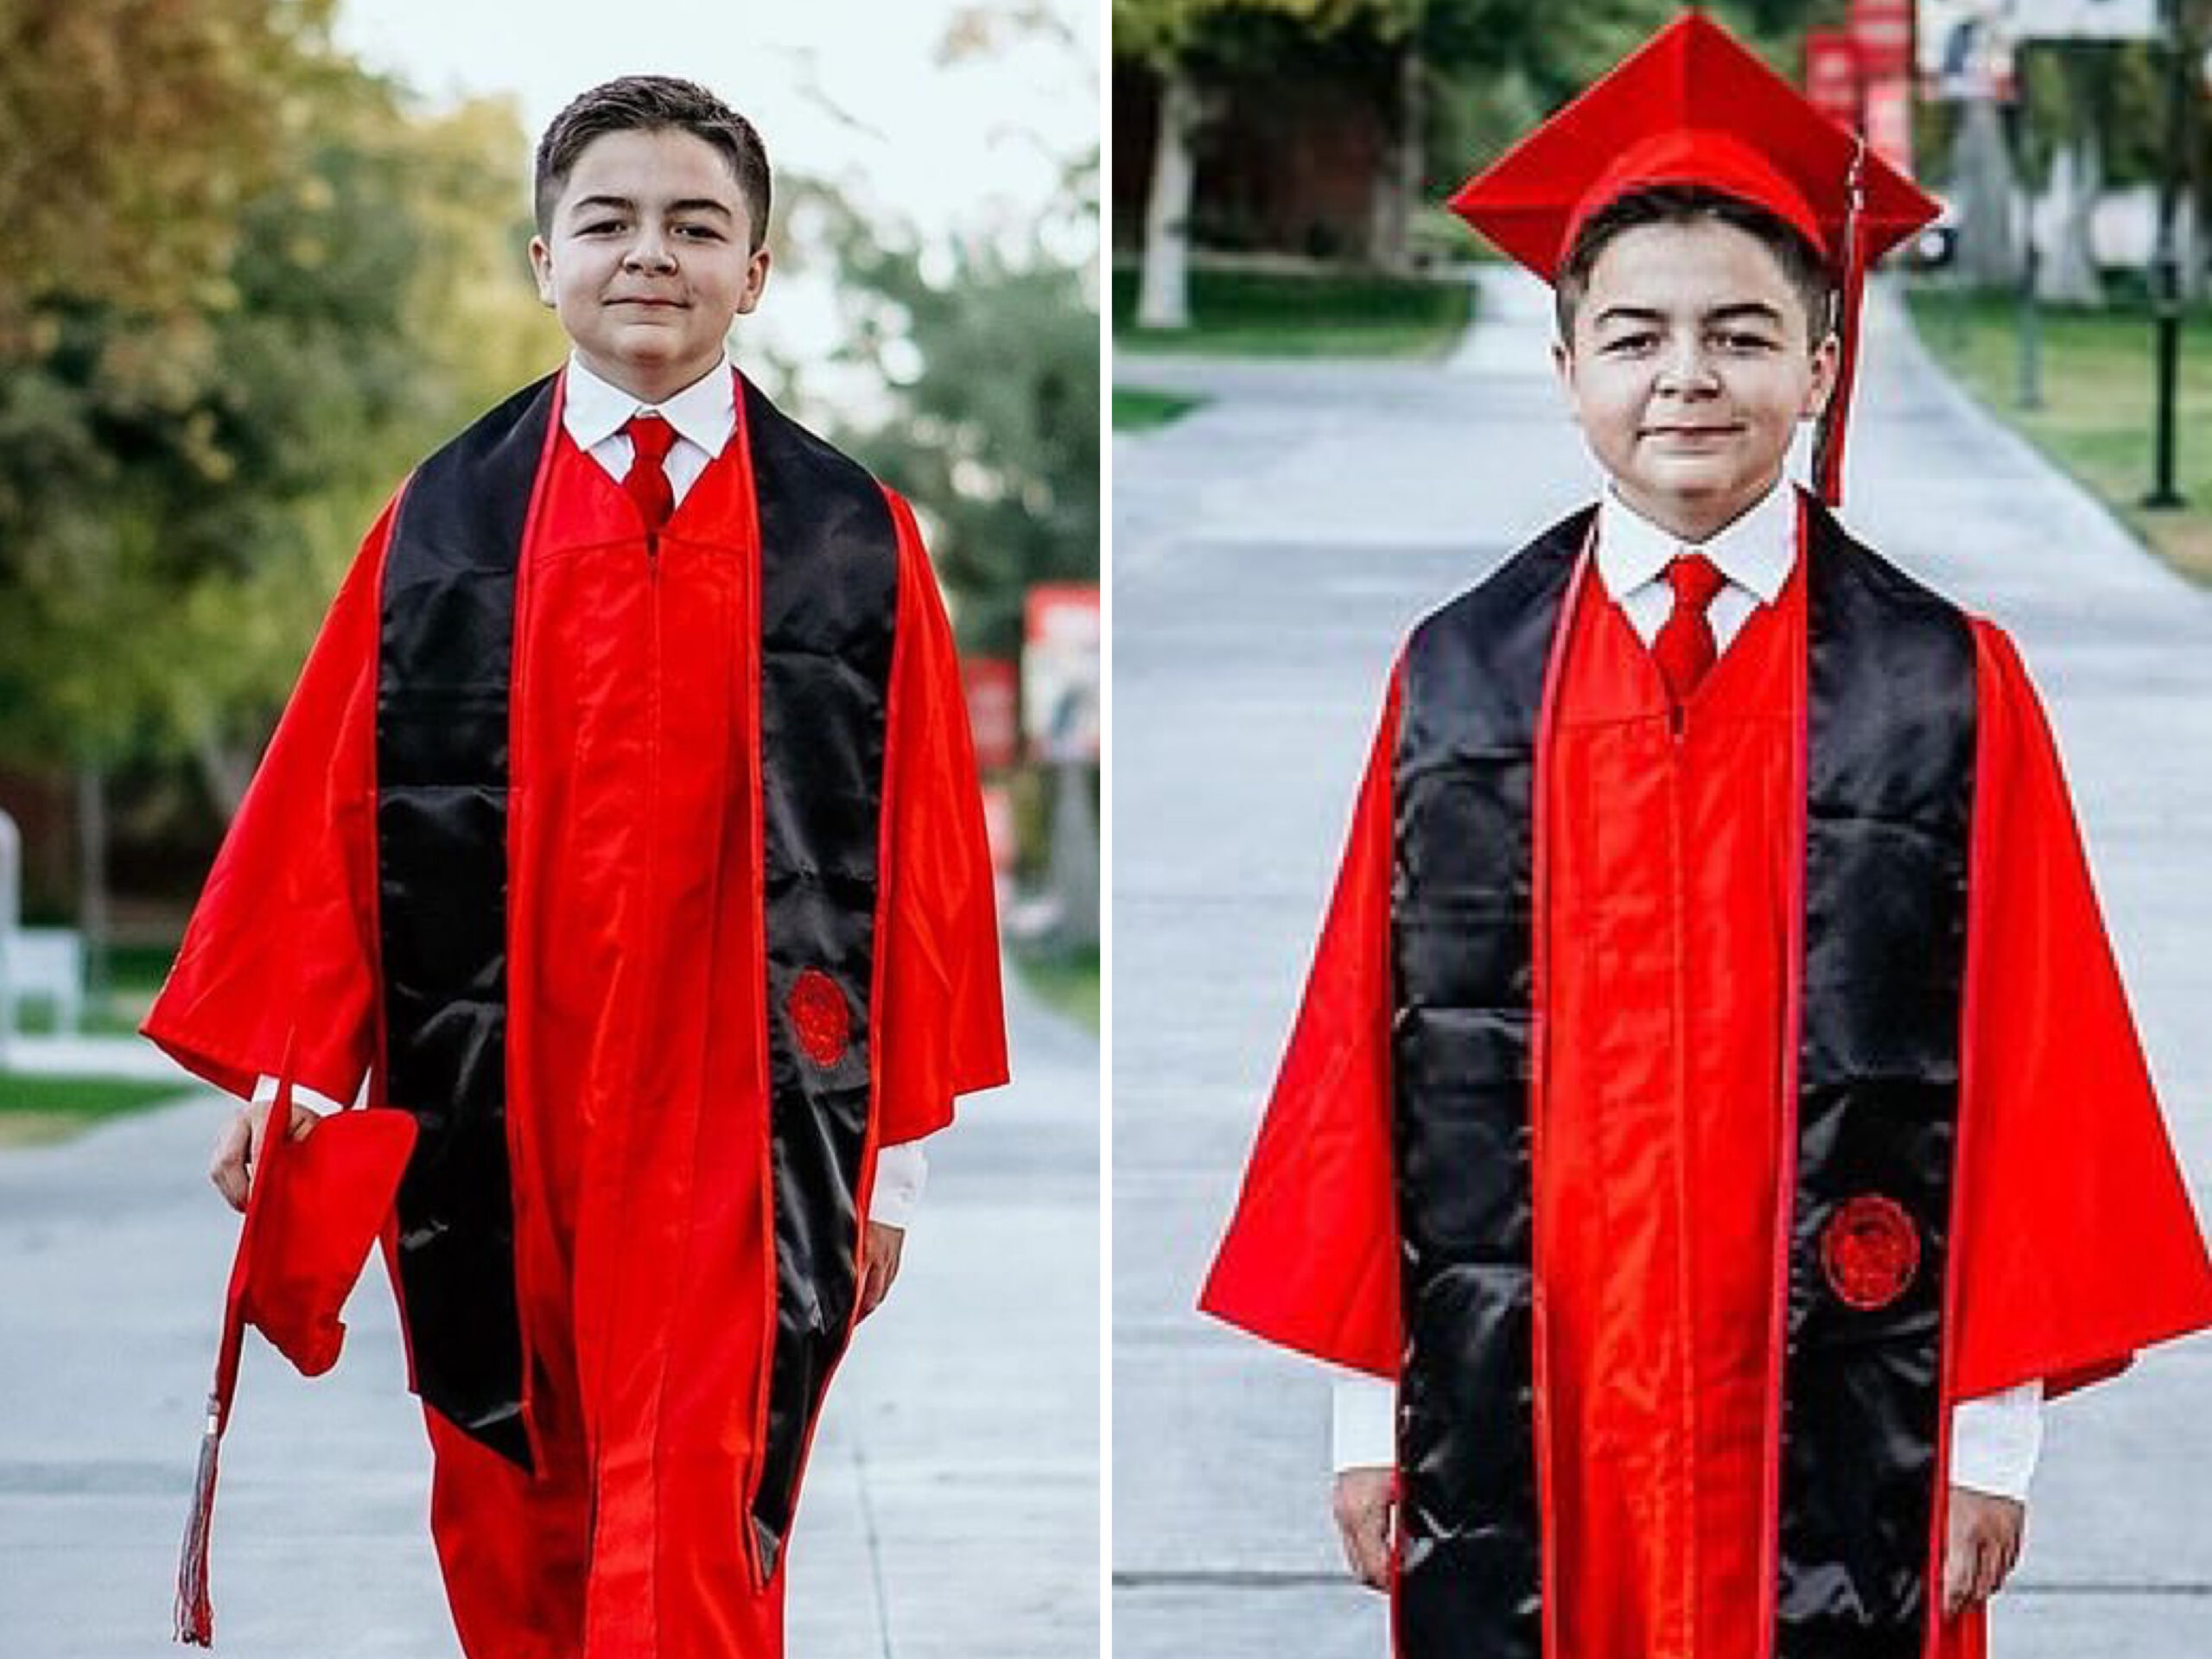 15-Year-Old Boy Becomes Youngest Person Ever To Graduate From University Of Nevada - Fifth Degree In Four Years